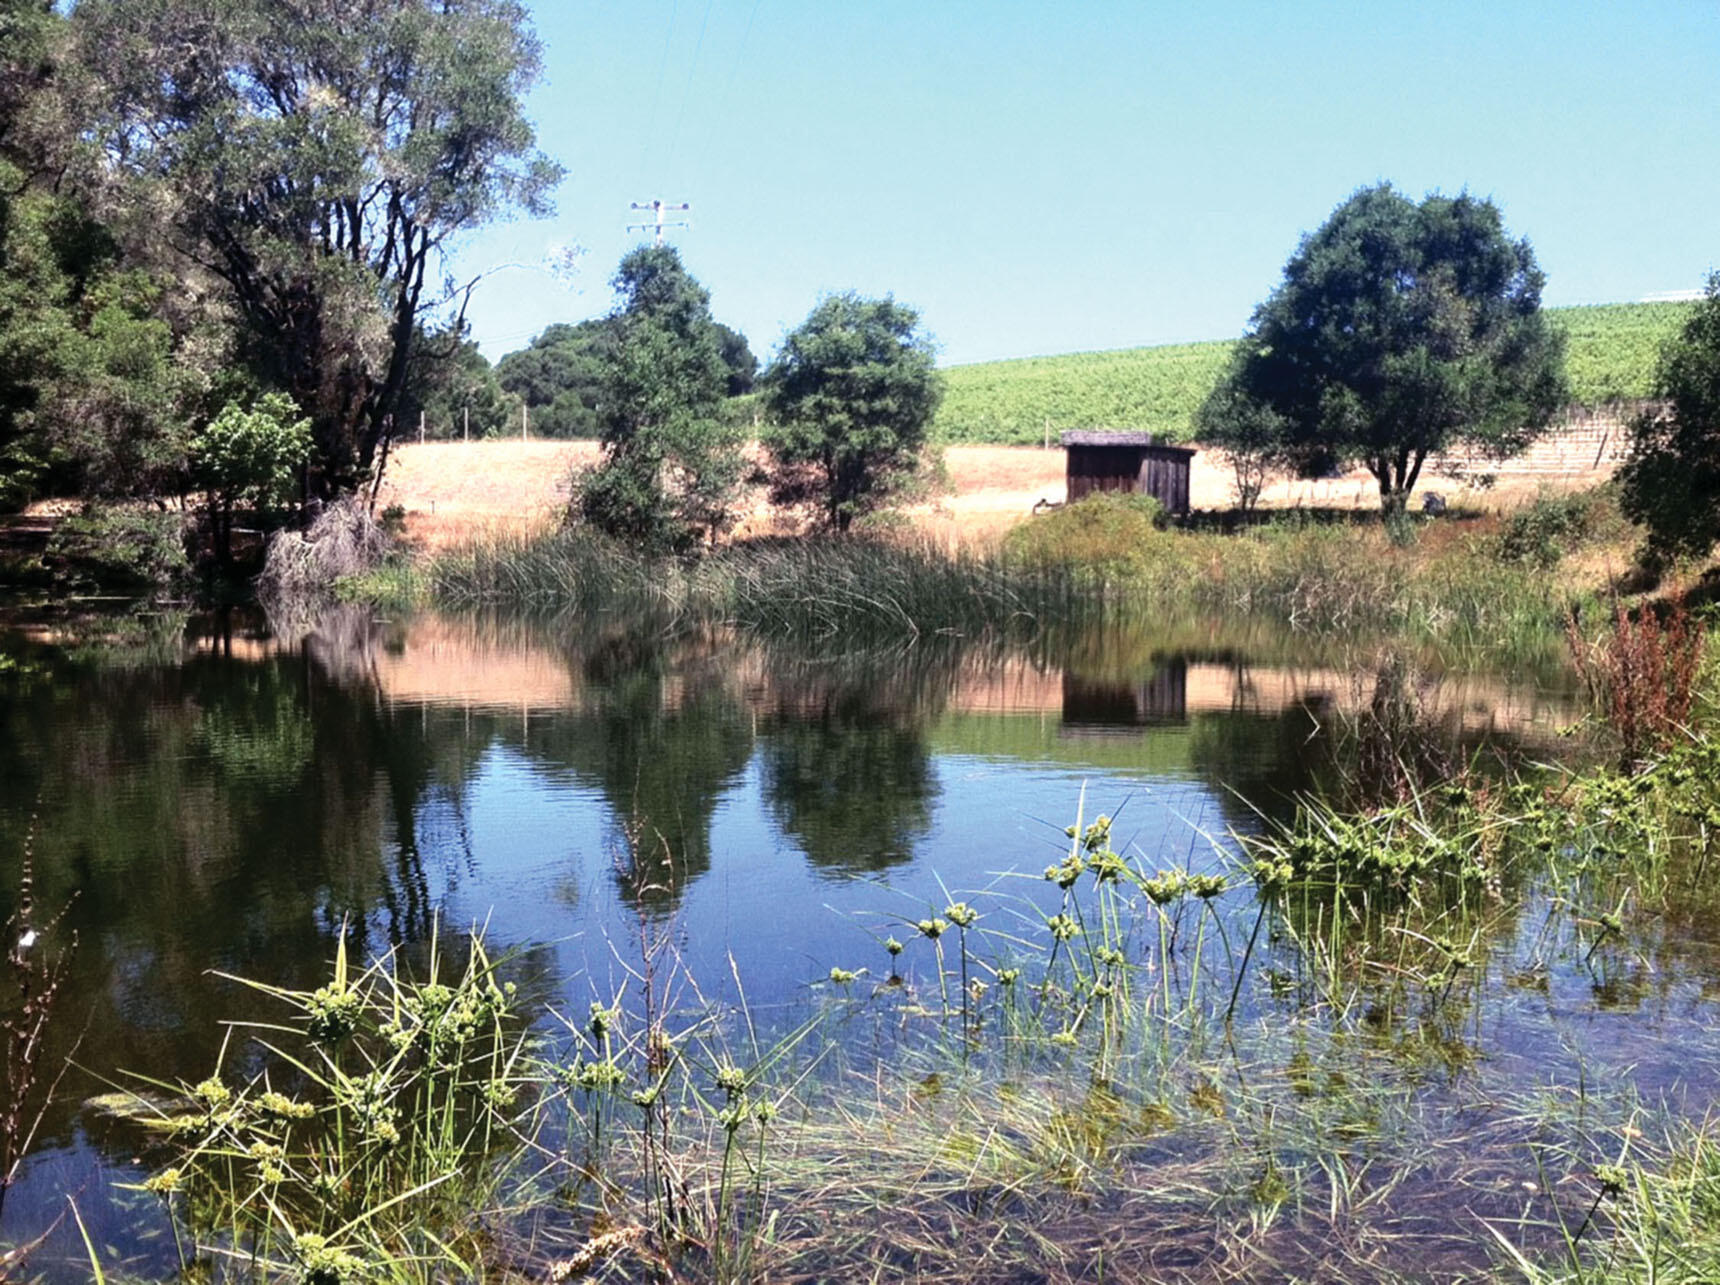 This reservoir at Husch Vineyards in Anderson Valley, California, is used to provide water during the dry season to prevent overreliance on the neighboring Navarro River. (Photo courtesy of Adina Merenlender.)